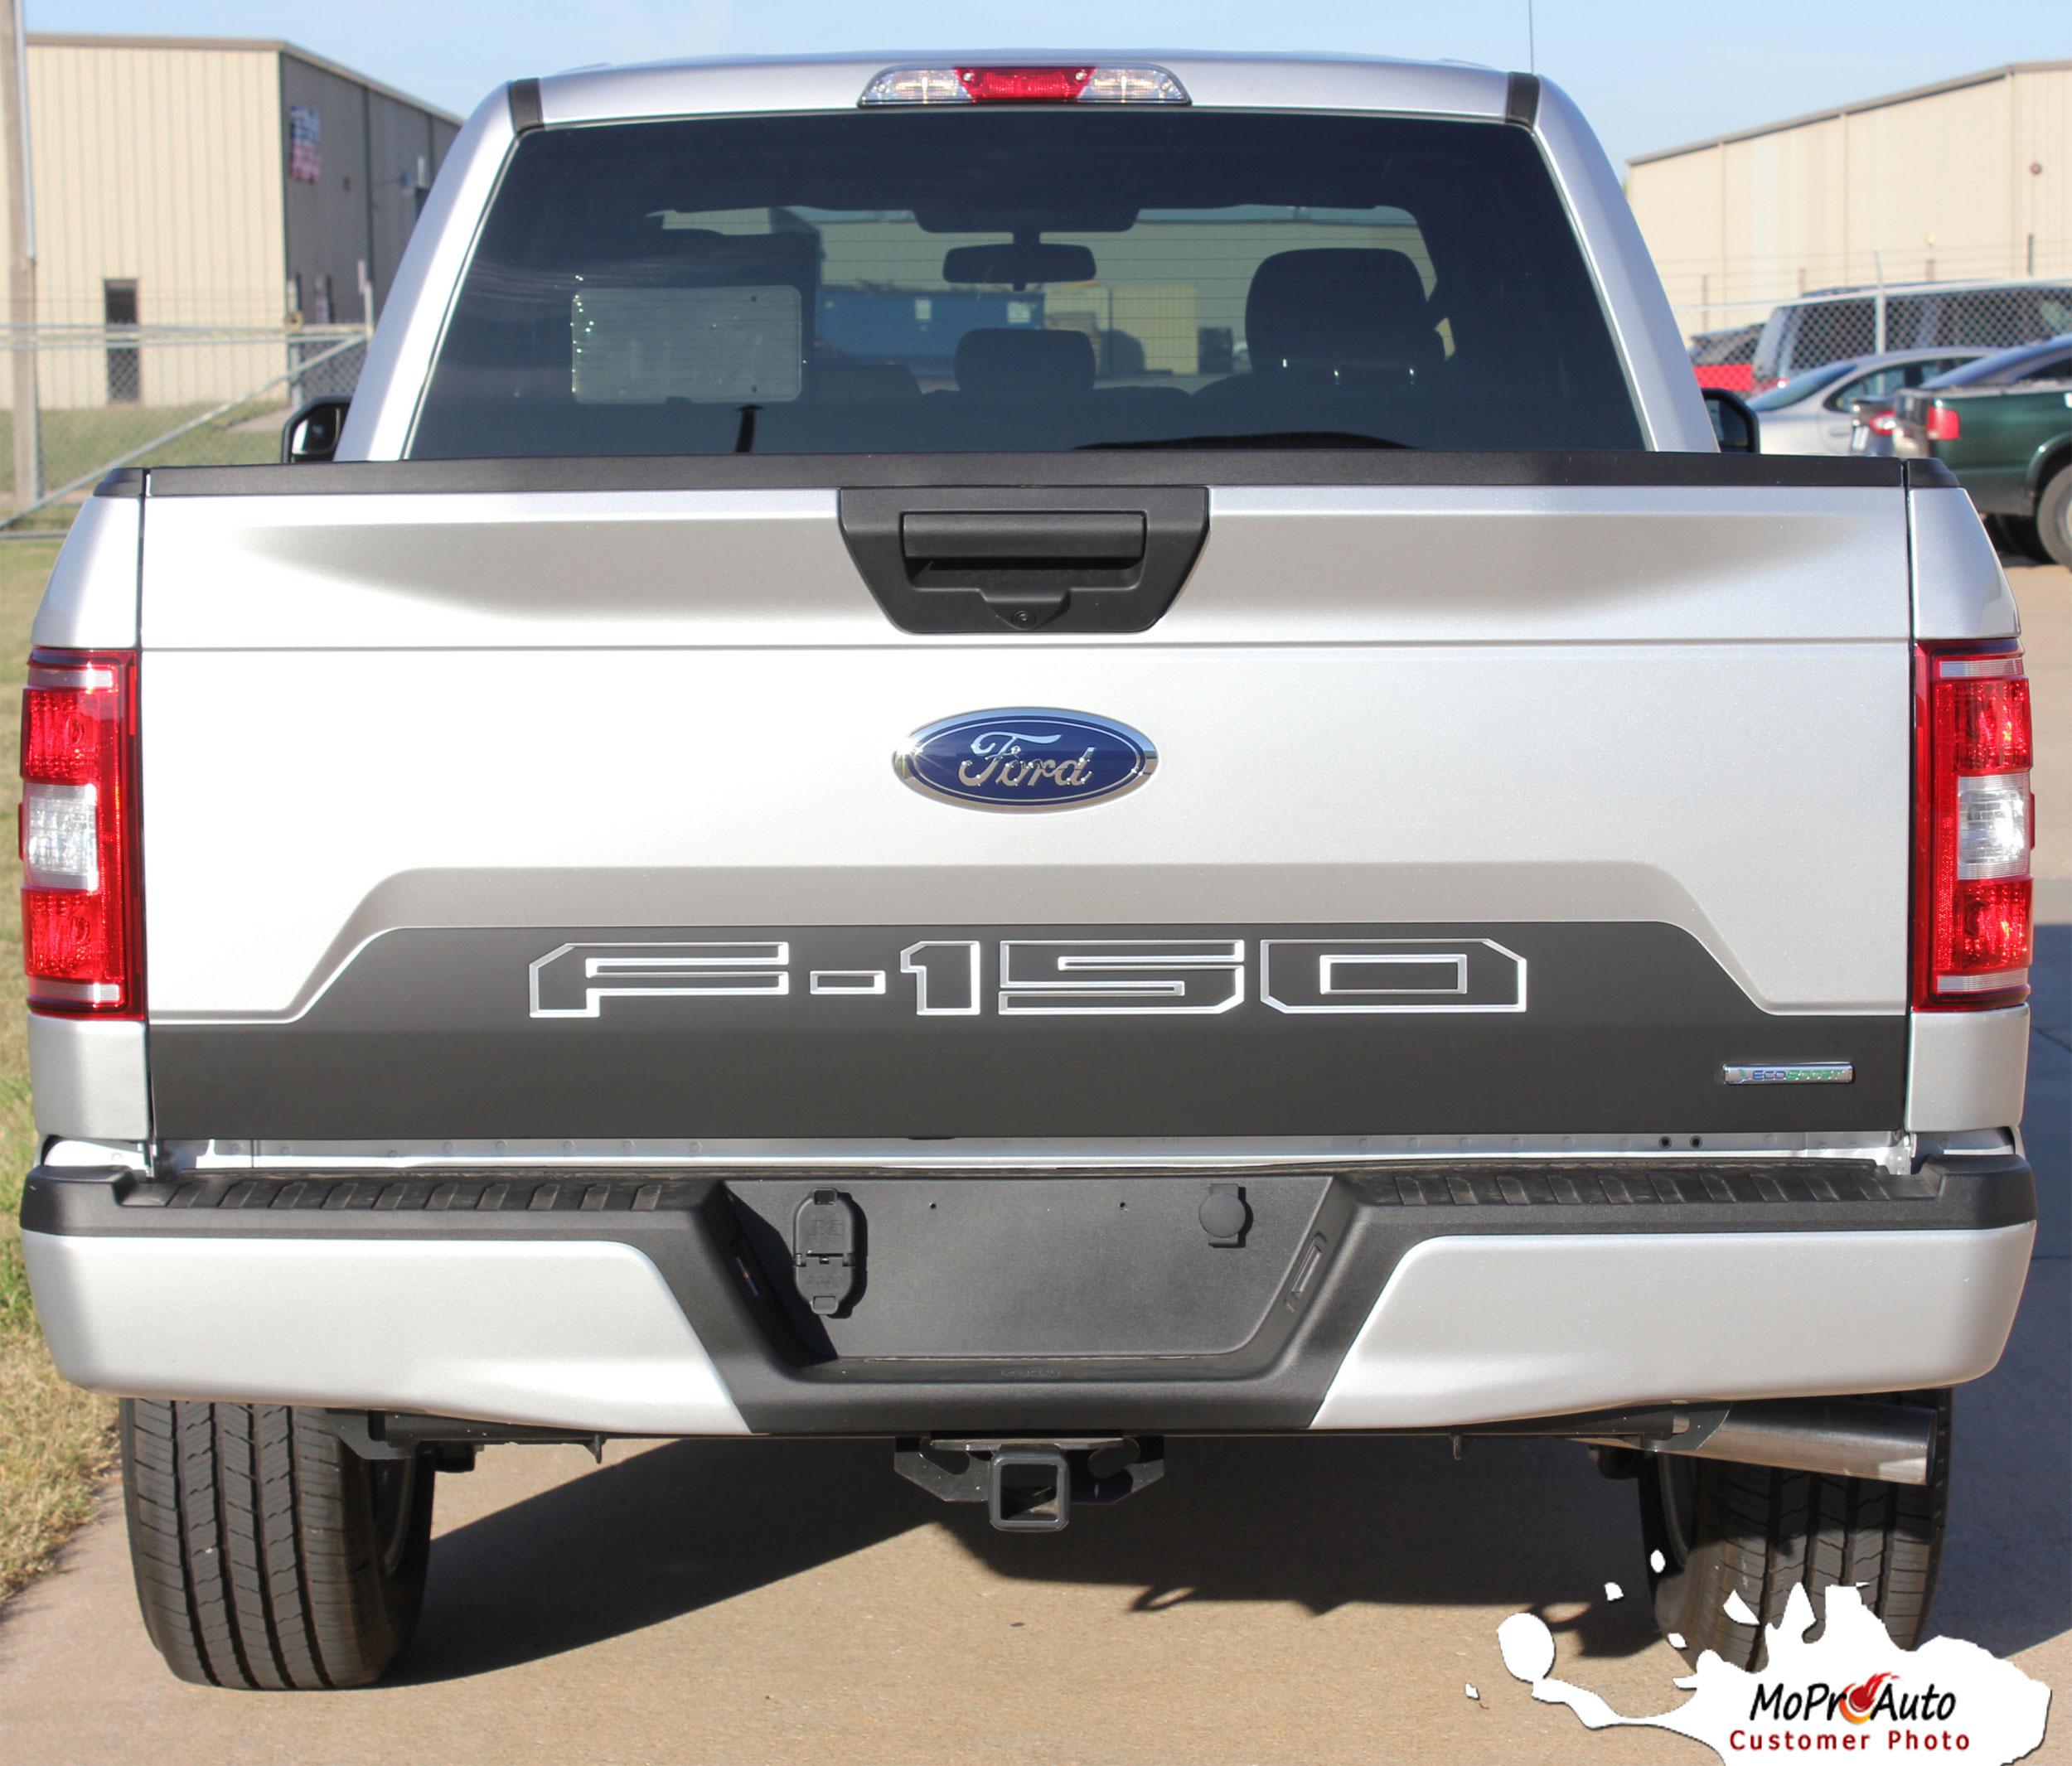 SPEEDWAY TAILGATE and TEXT INLAYS Ford F-Series F-150 Appearance Package Vinyl Graphics and Decals Kit - Customer Photo